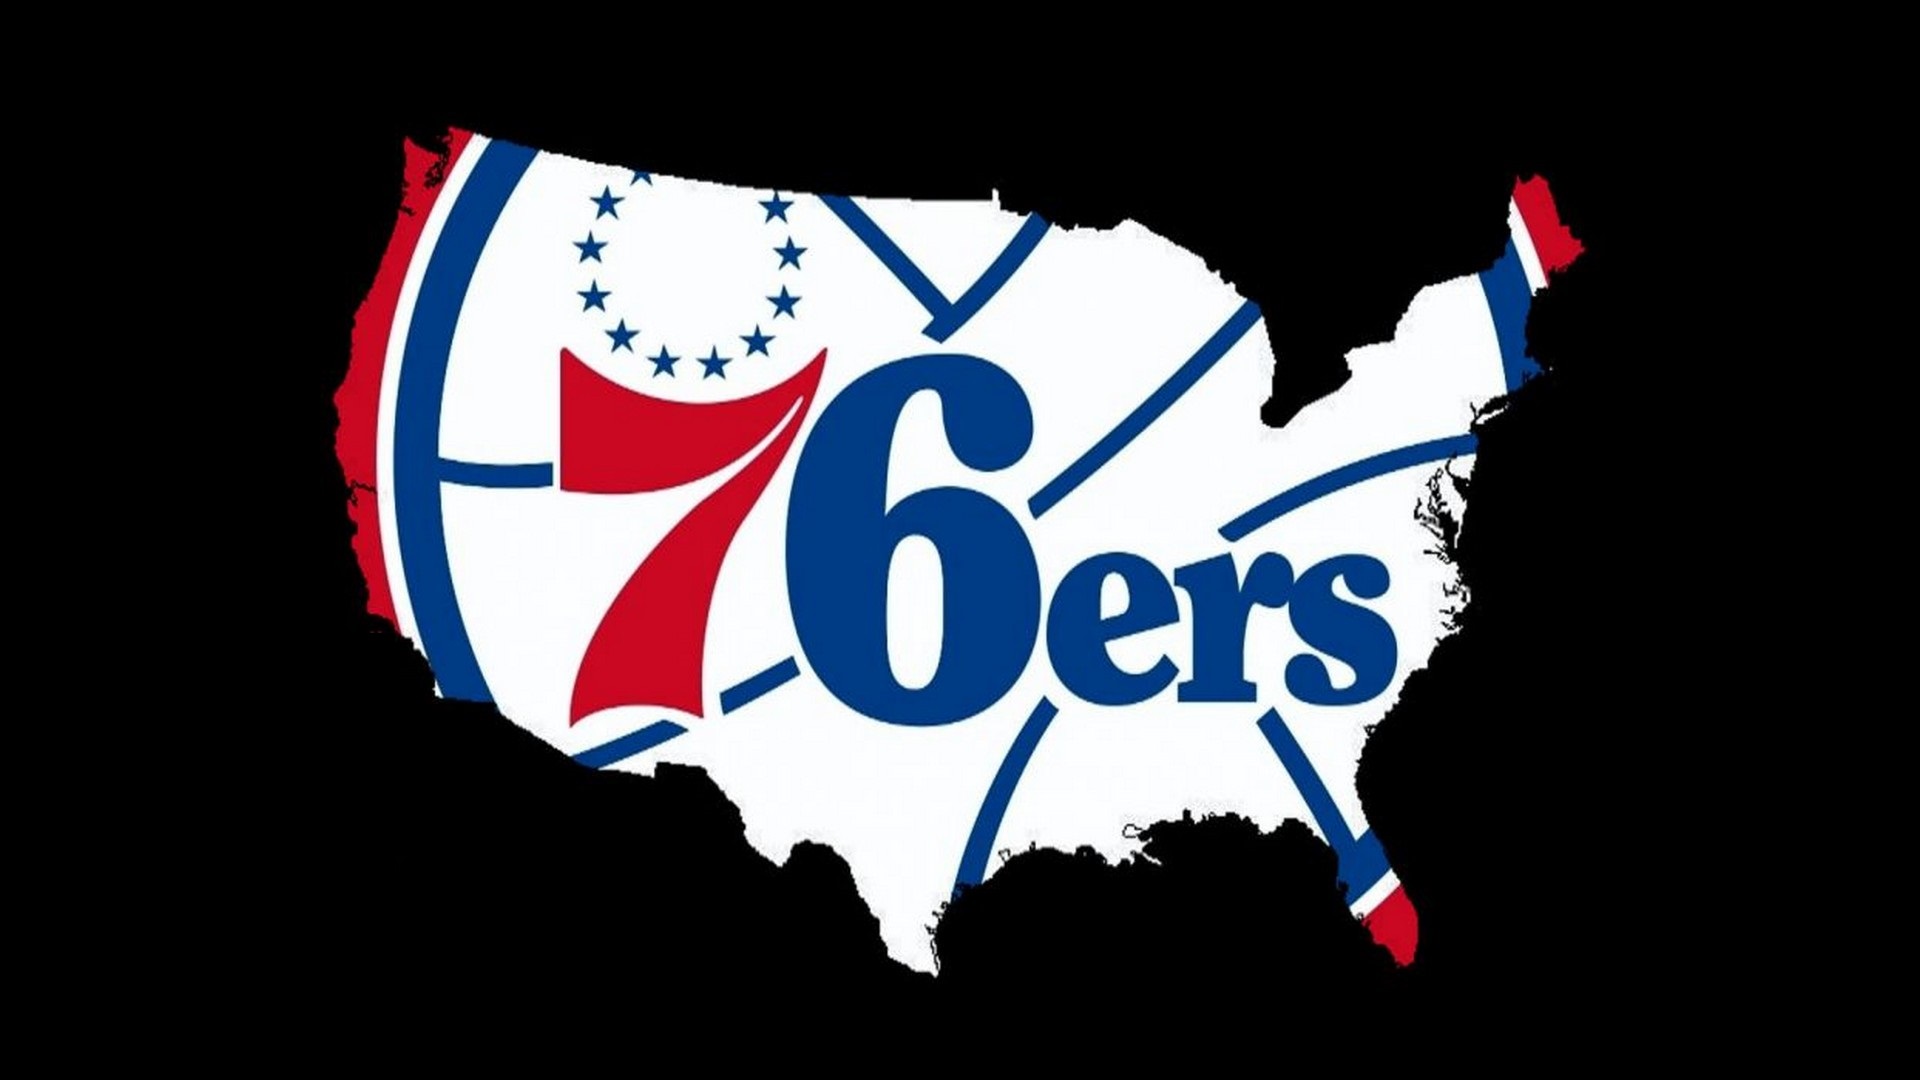 Philadelphia 76ers For PC Wallpaper with high-resolution 1920x1080 pixel. You can use this wallpaper for your Desktop Computer Backgrounds, Windows or Mac Screensavers, iPhone Lock screen, Tablet or Android and another Mobile Phone device